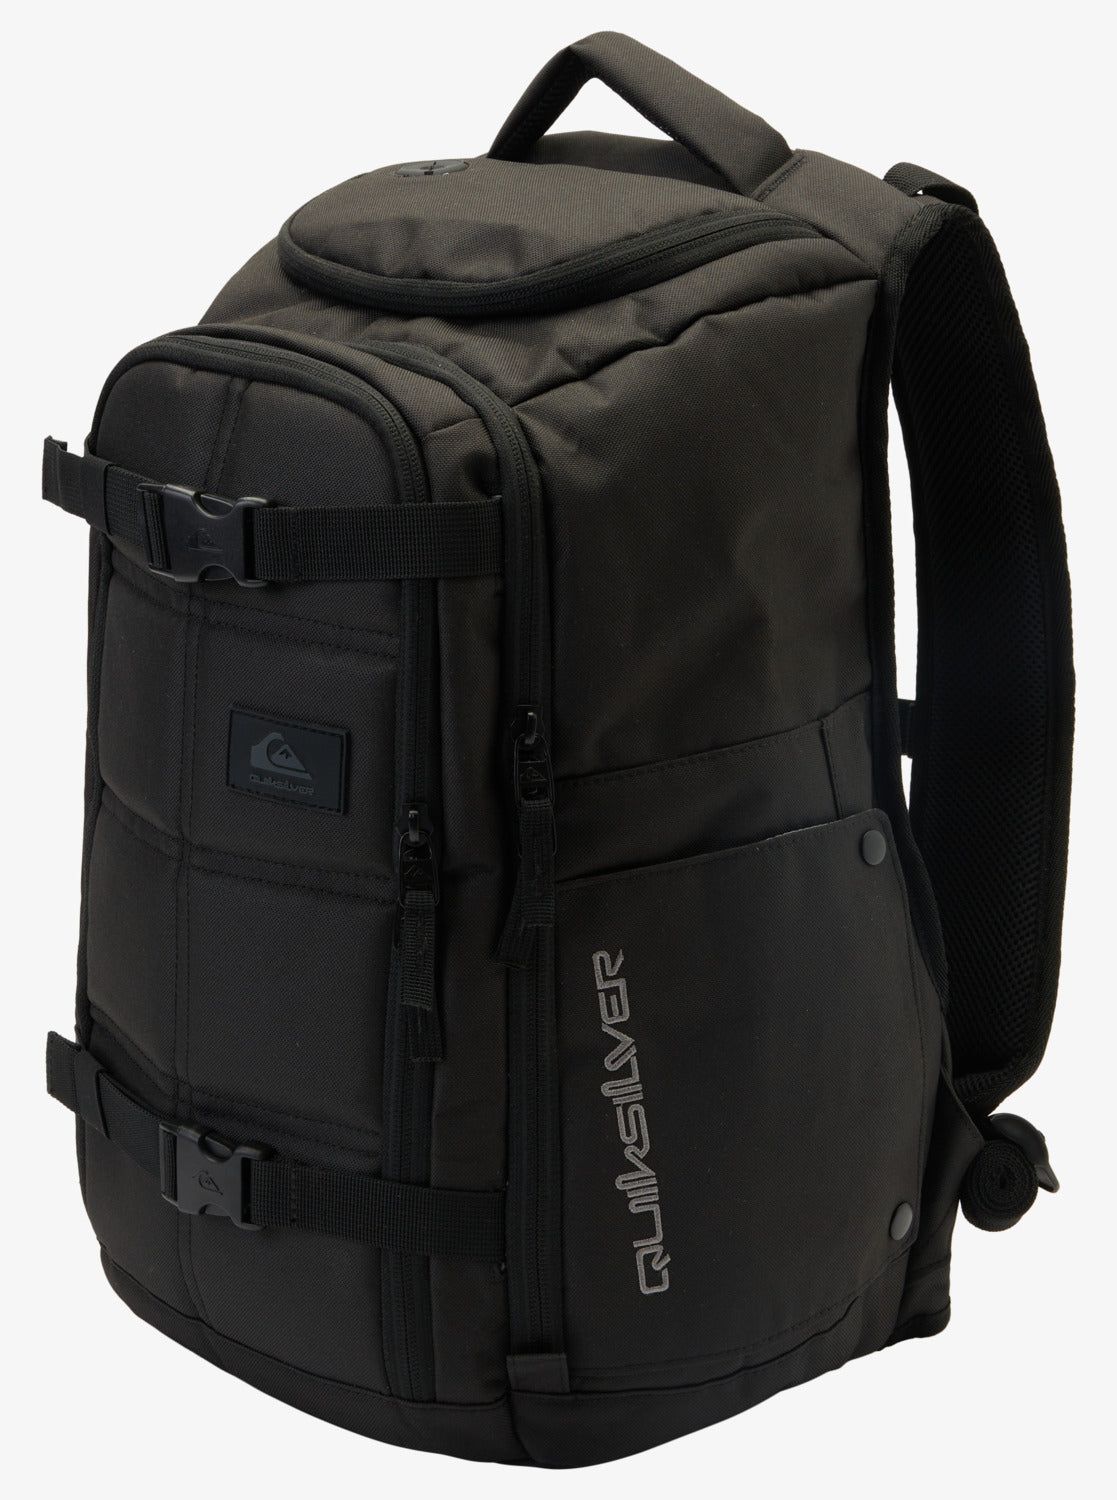 Quiksilver Grenade 32 L Large Premium Backpack in black from side